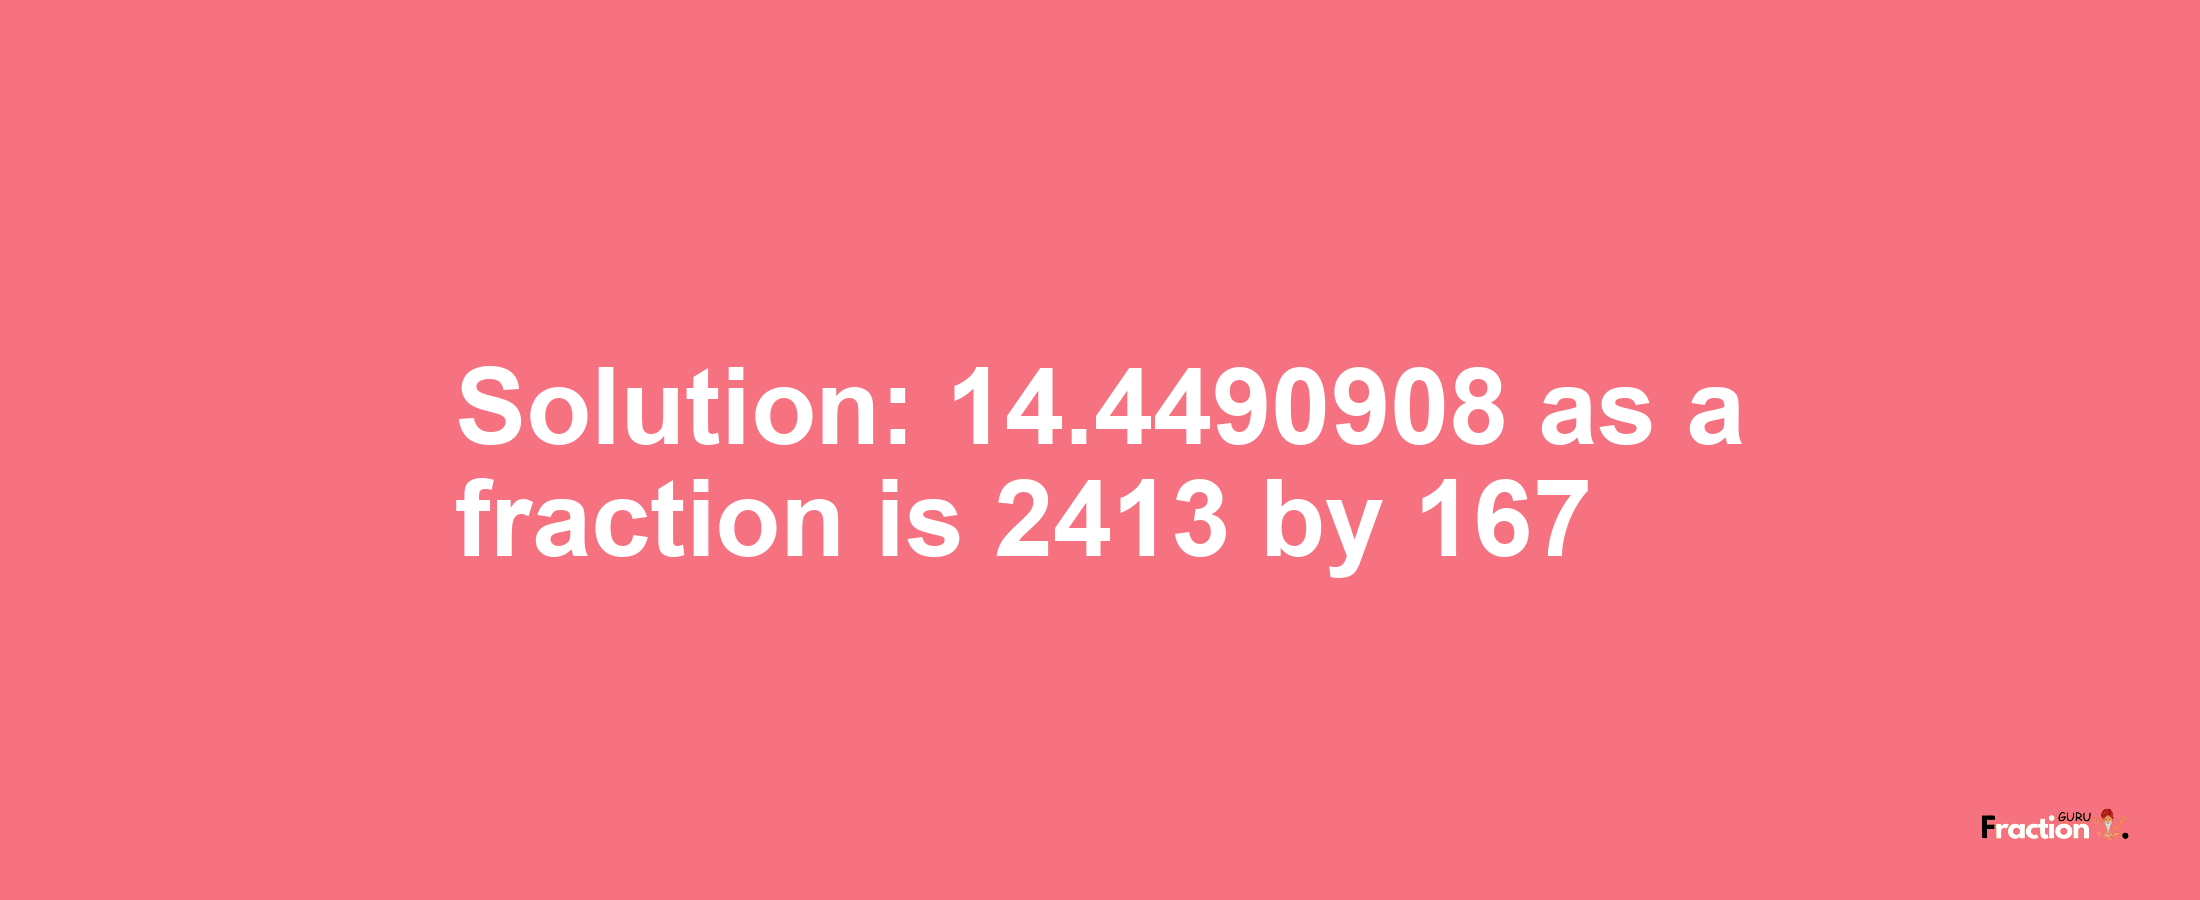 Solution:14.4490908 as a fraction is 2413/167